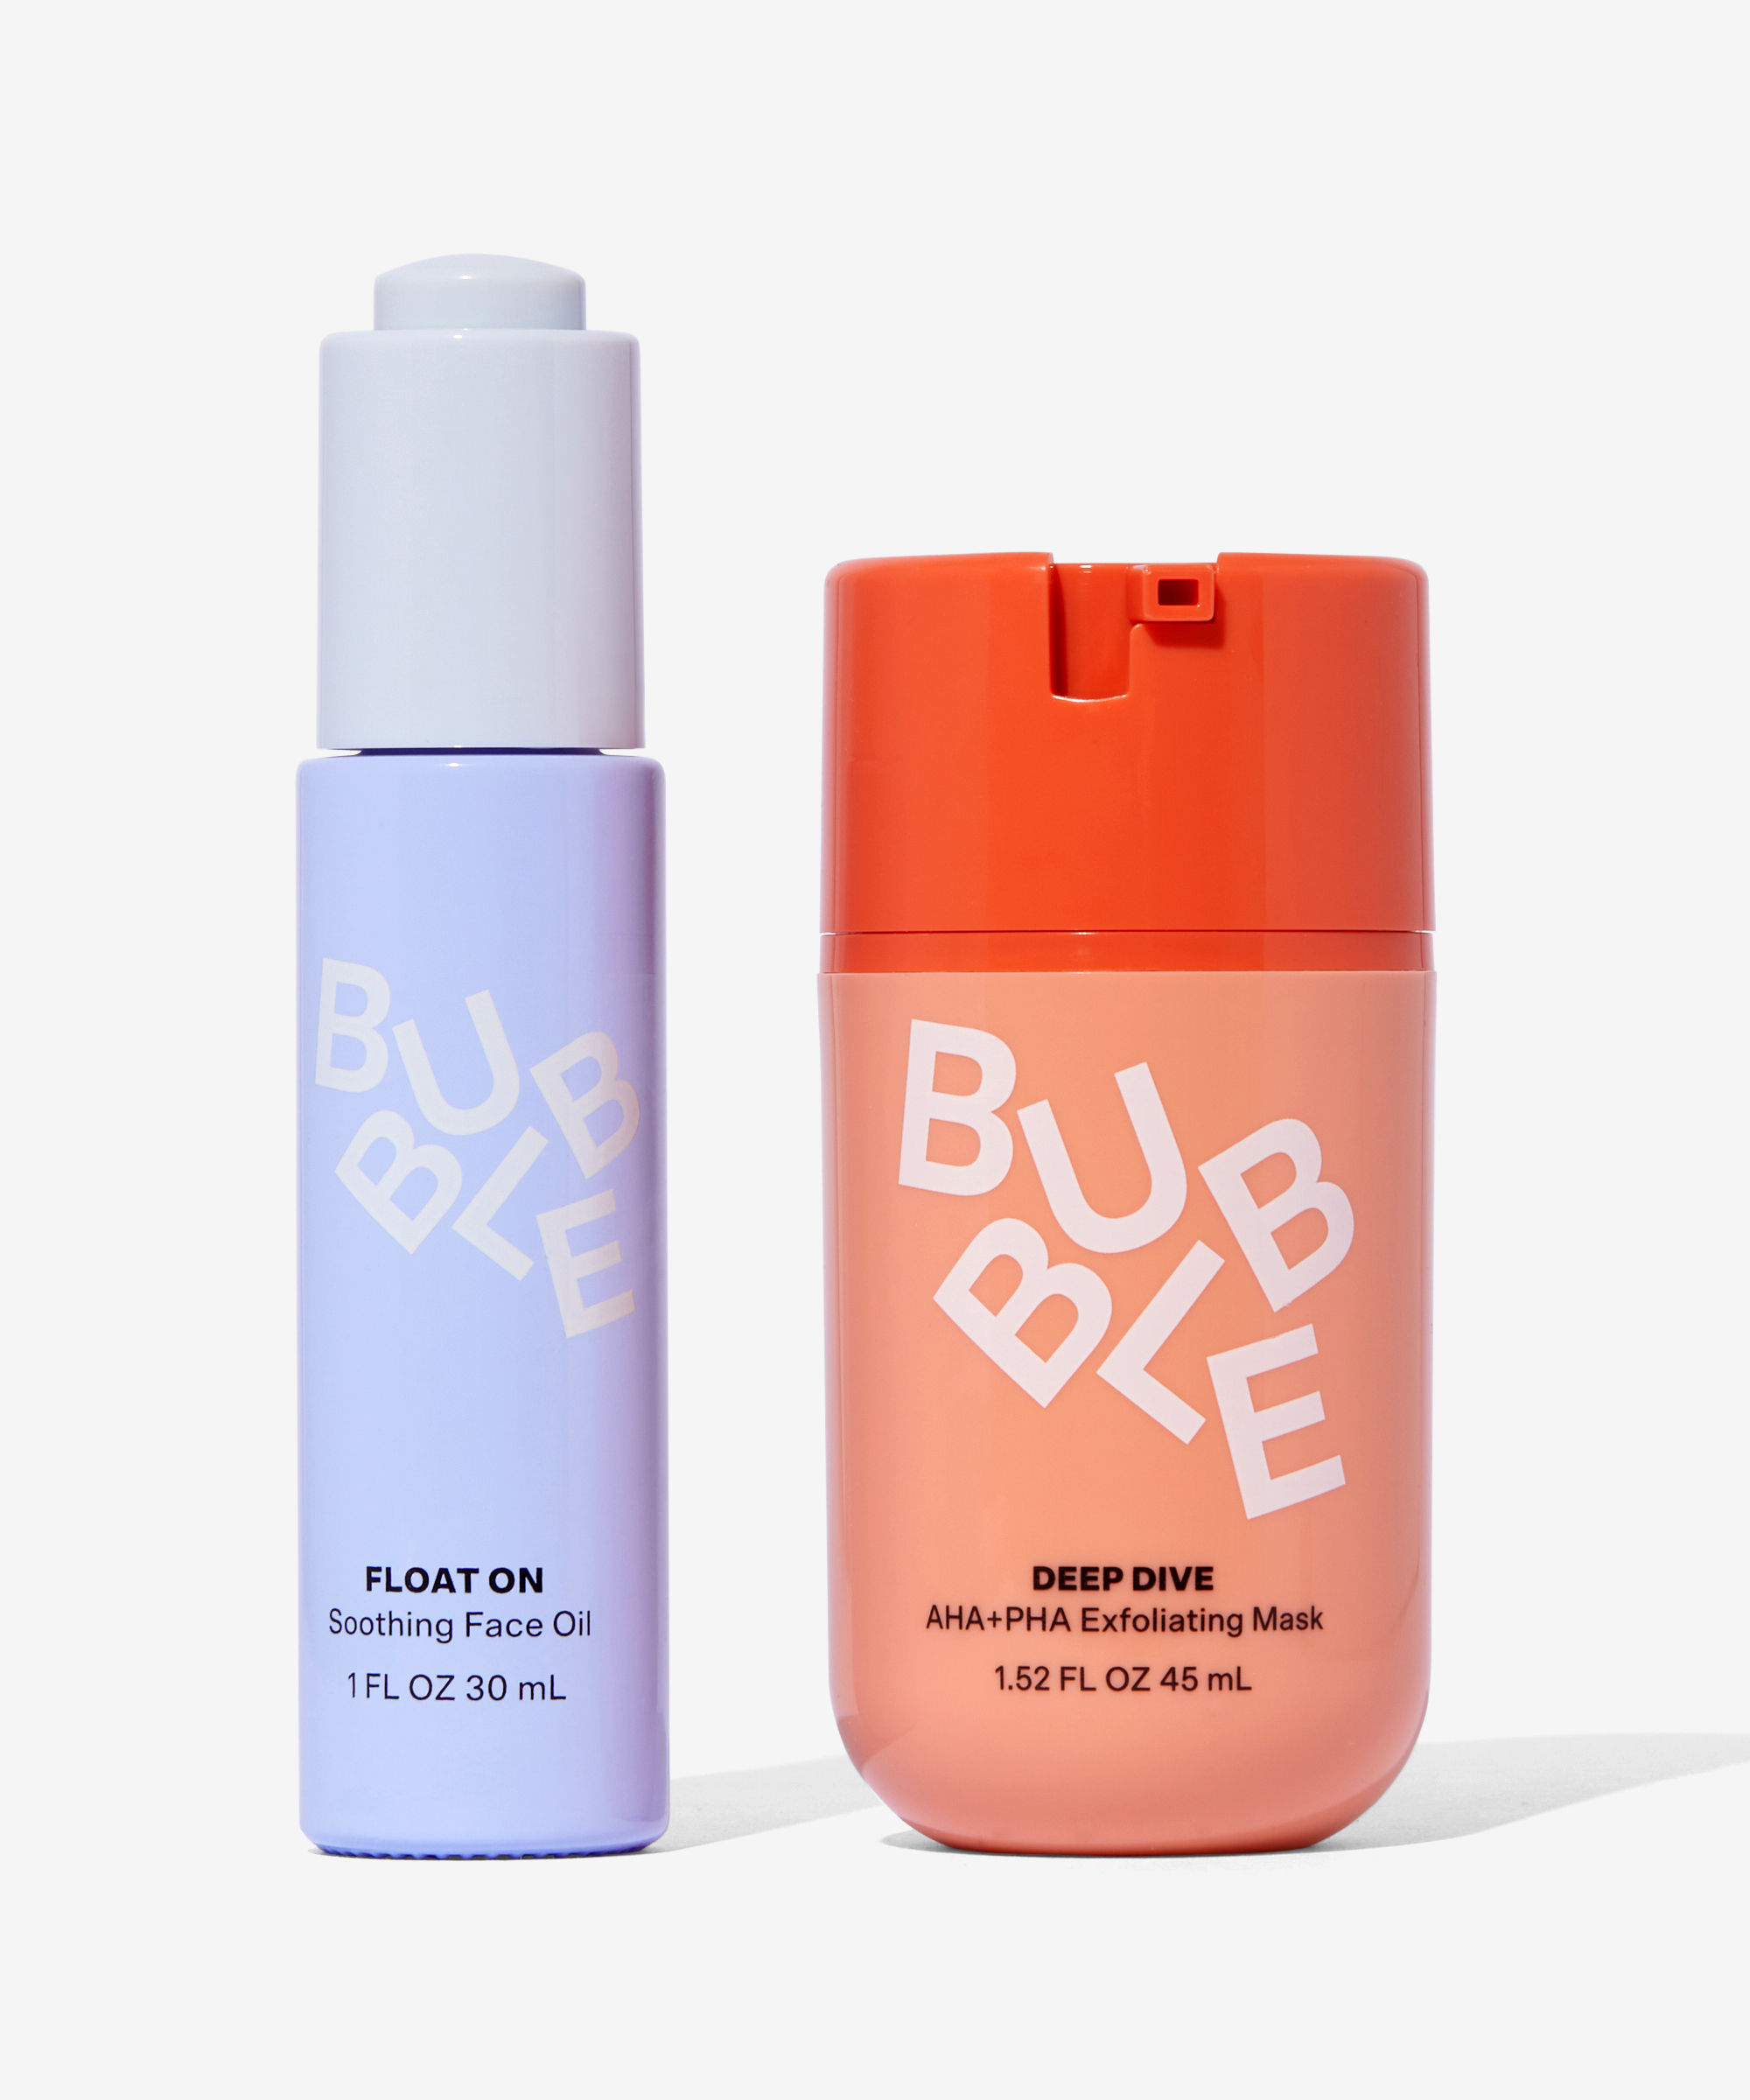 The Top 11 Best Bubble Skincare Products - Beauty Bay Edited